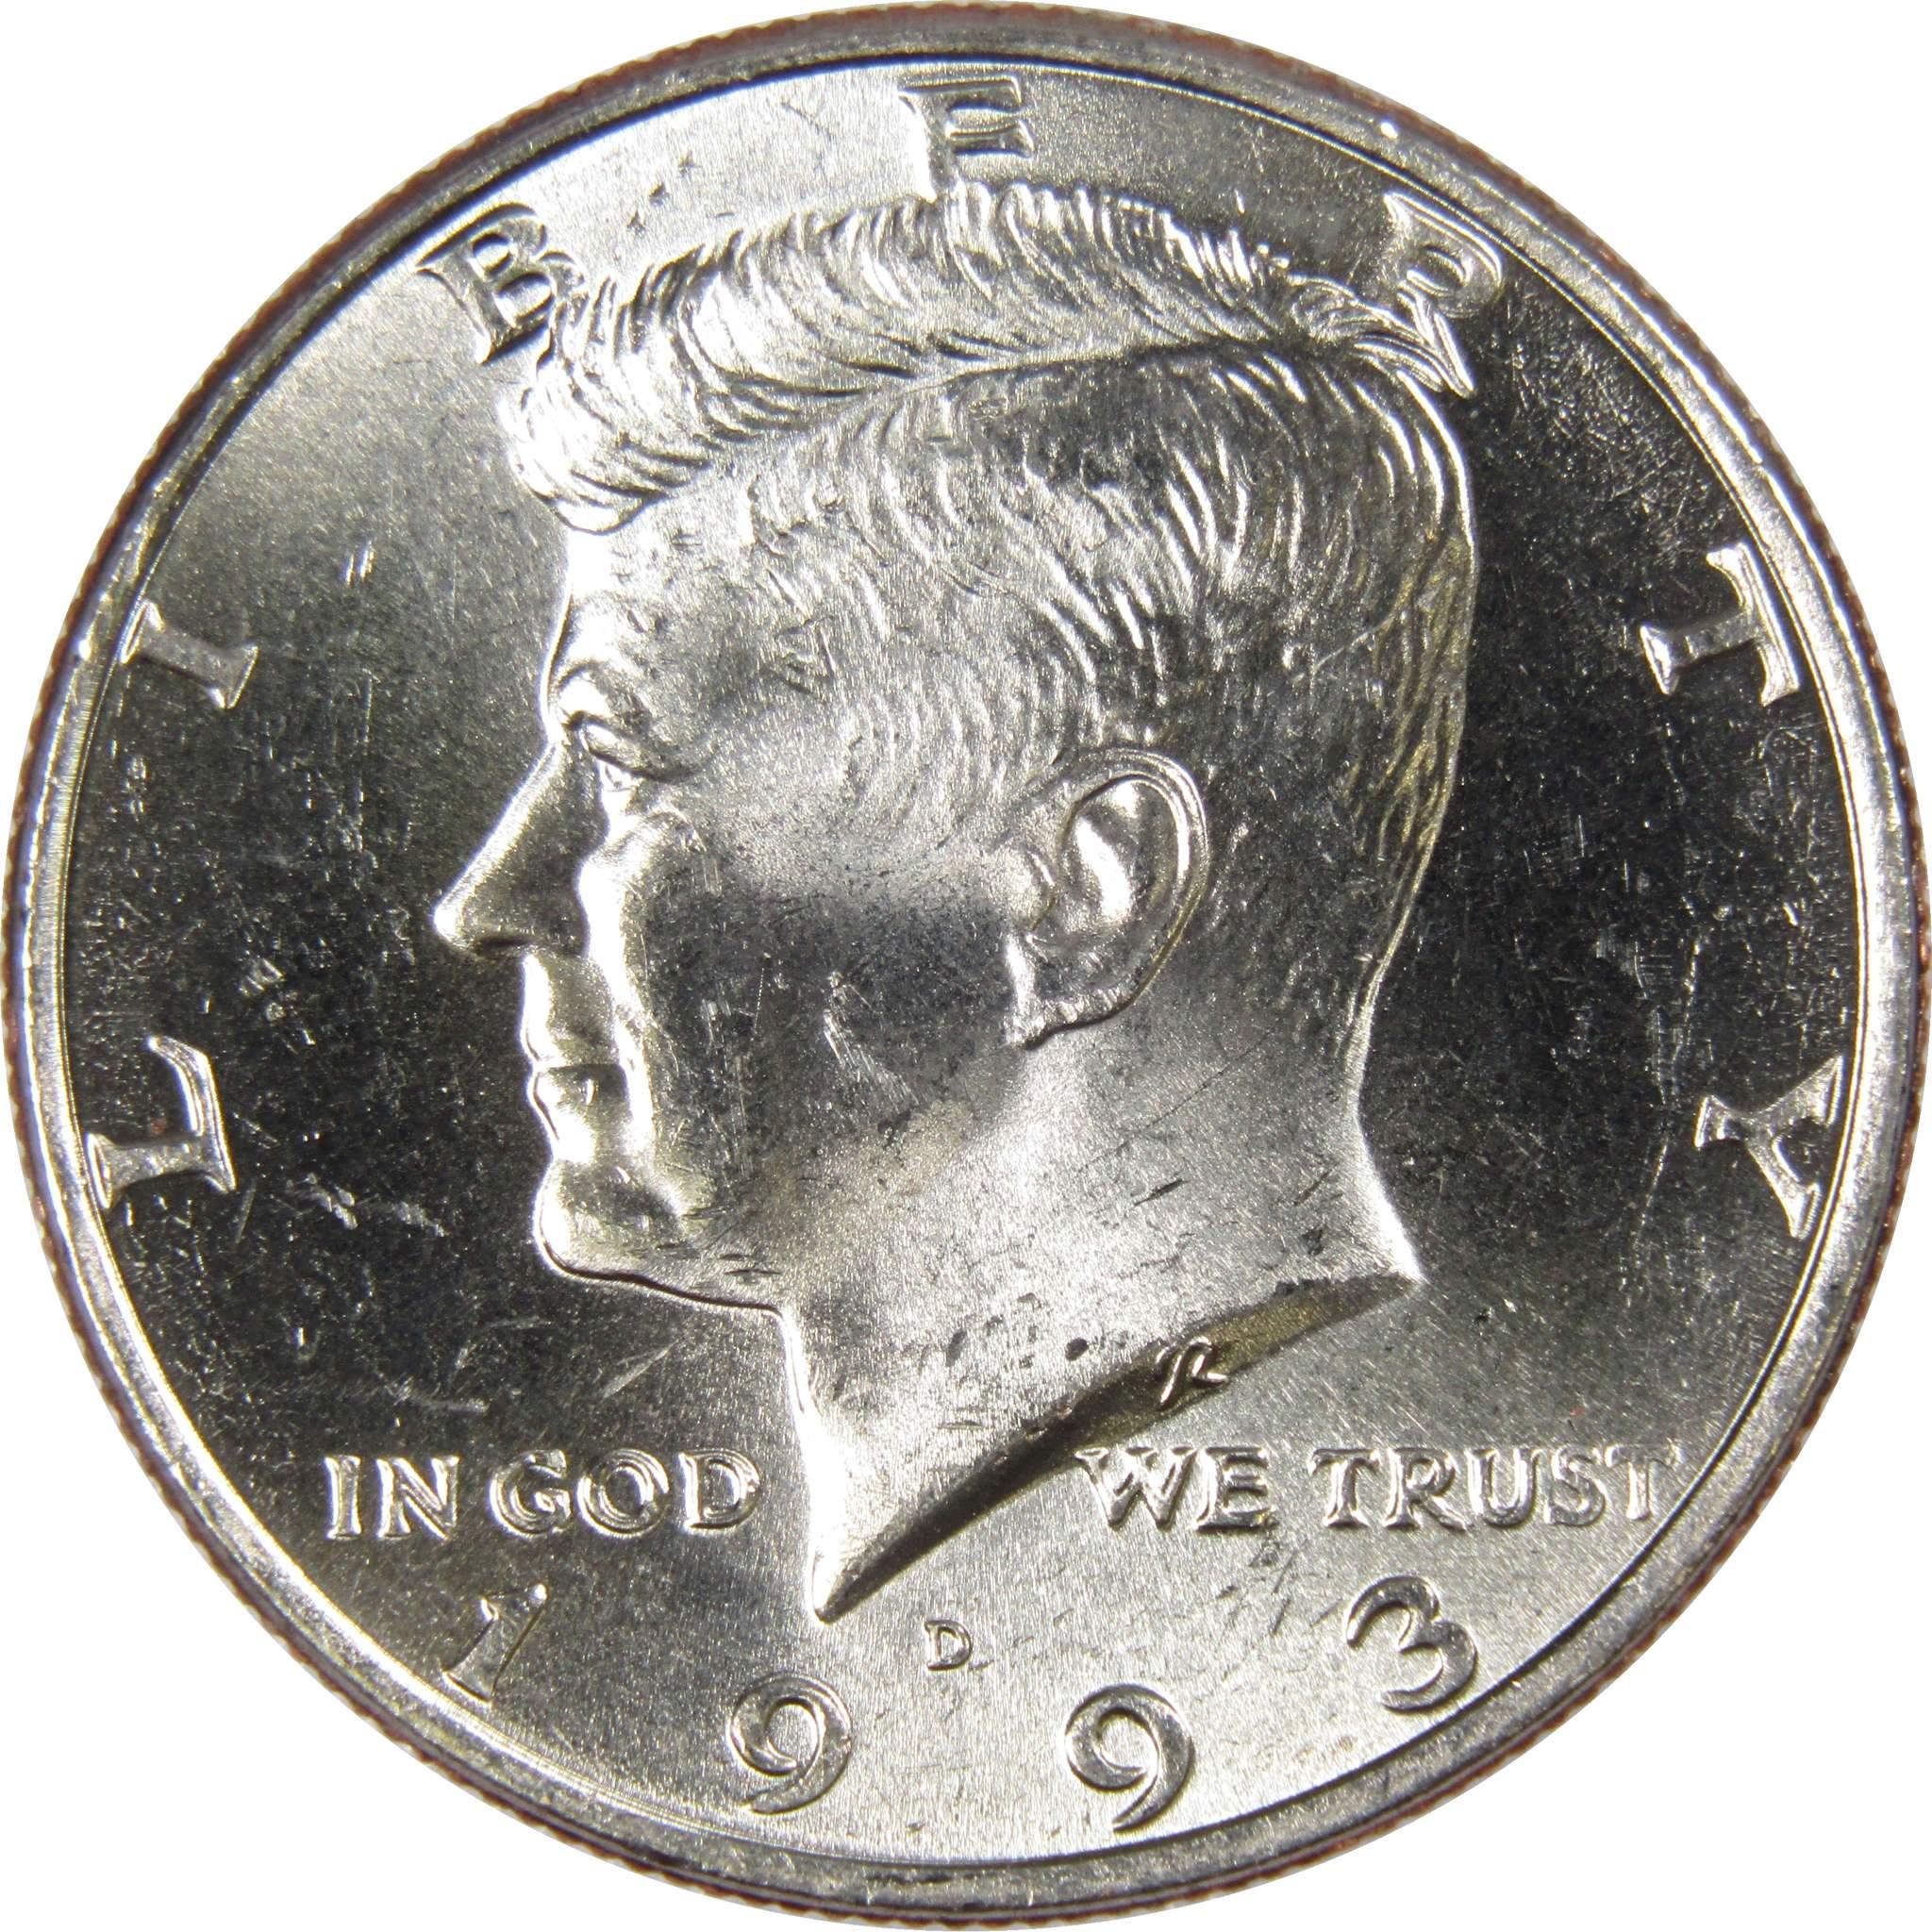 1993 D Kennedy Half Dollar BU Uncirculated Mint State 50c US Coin Collectible